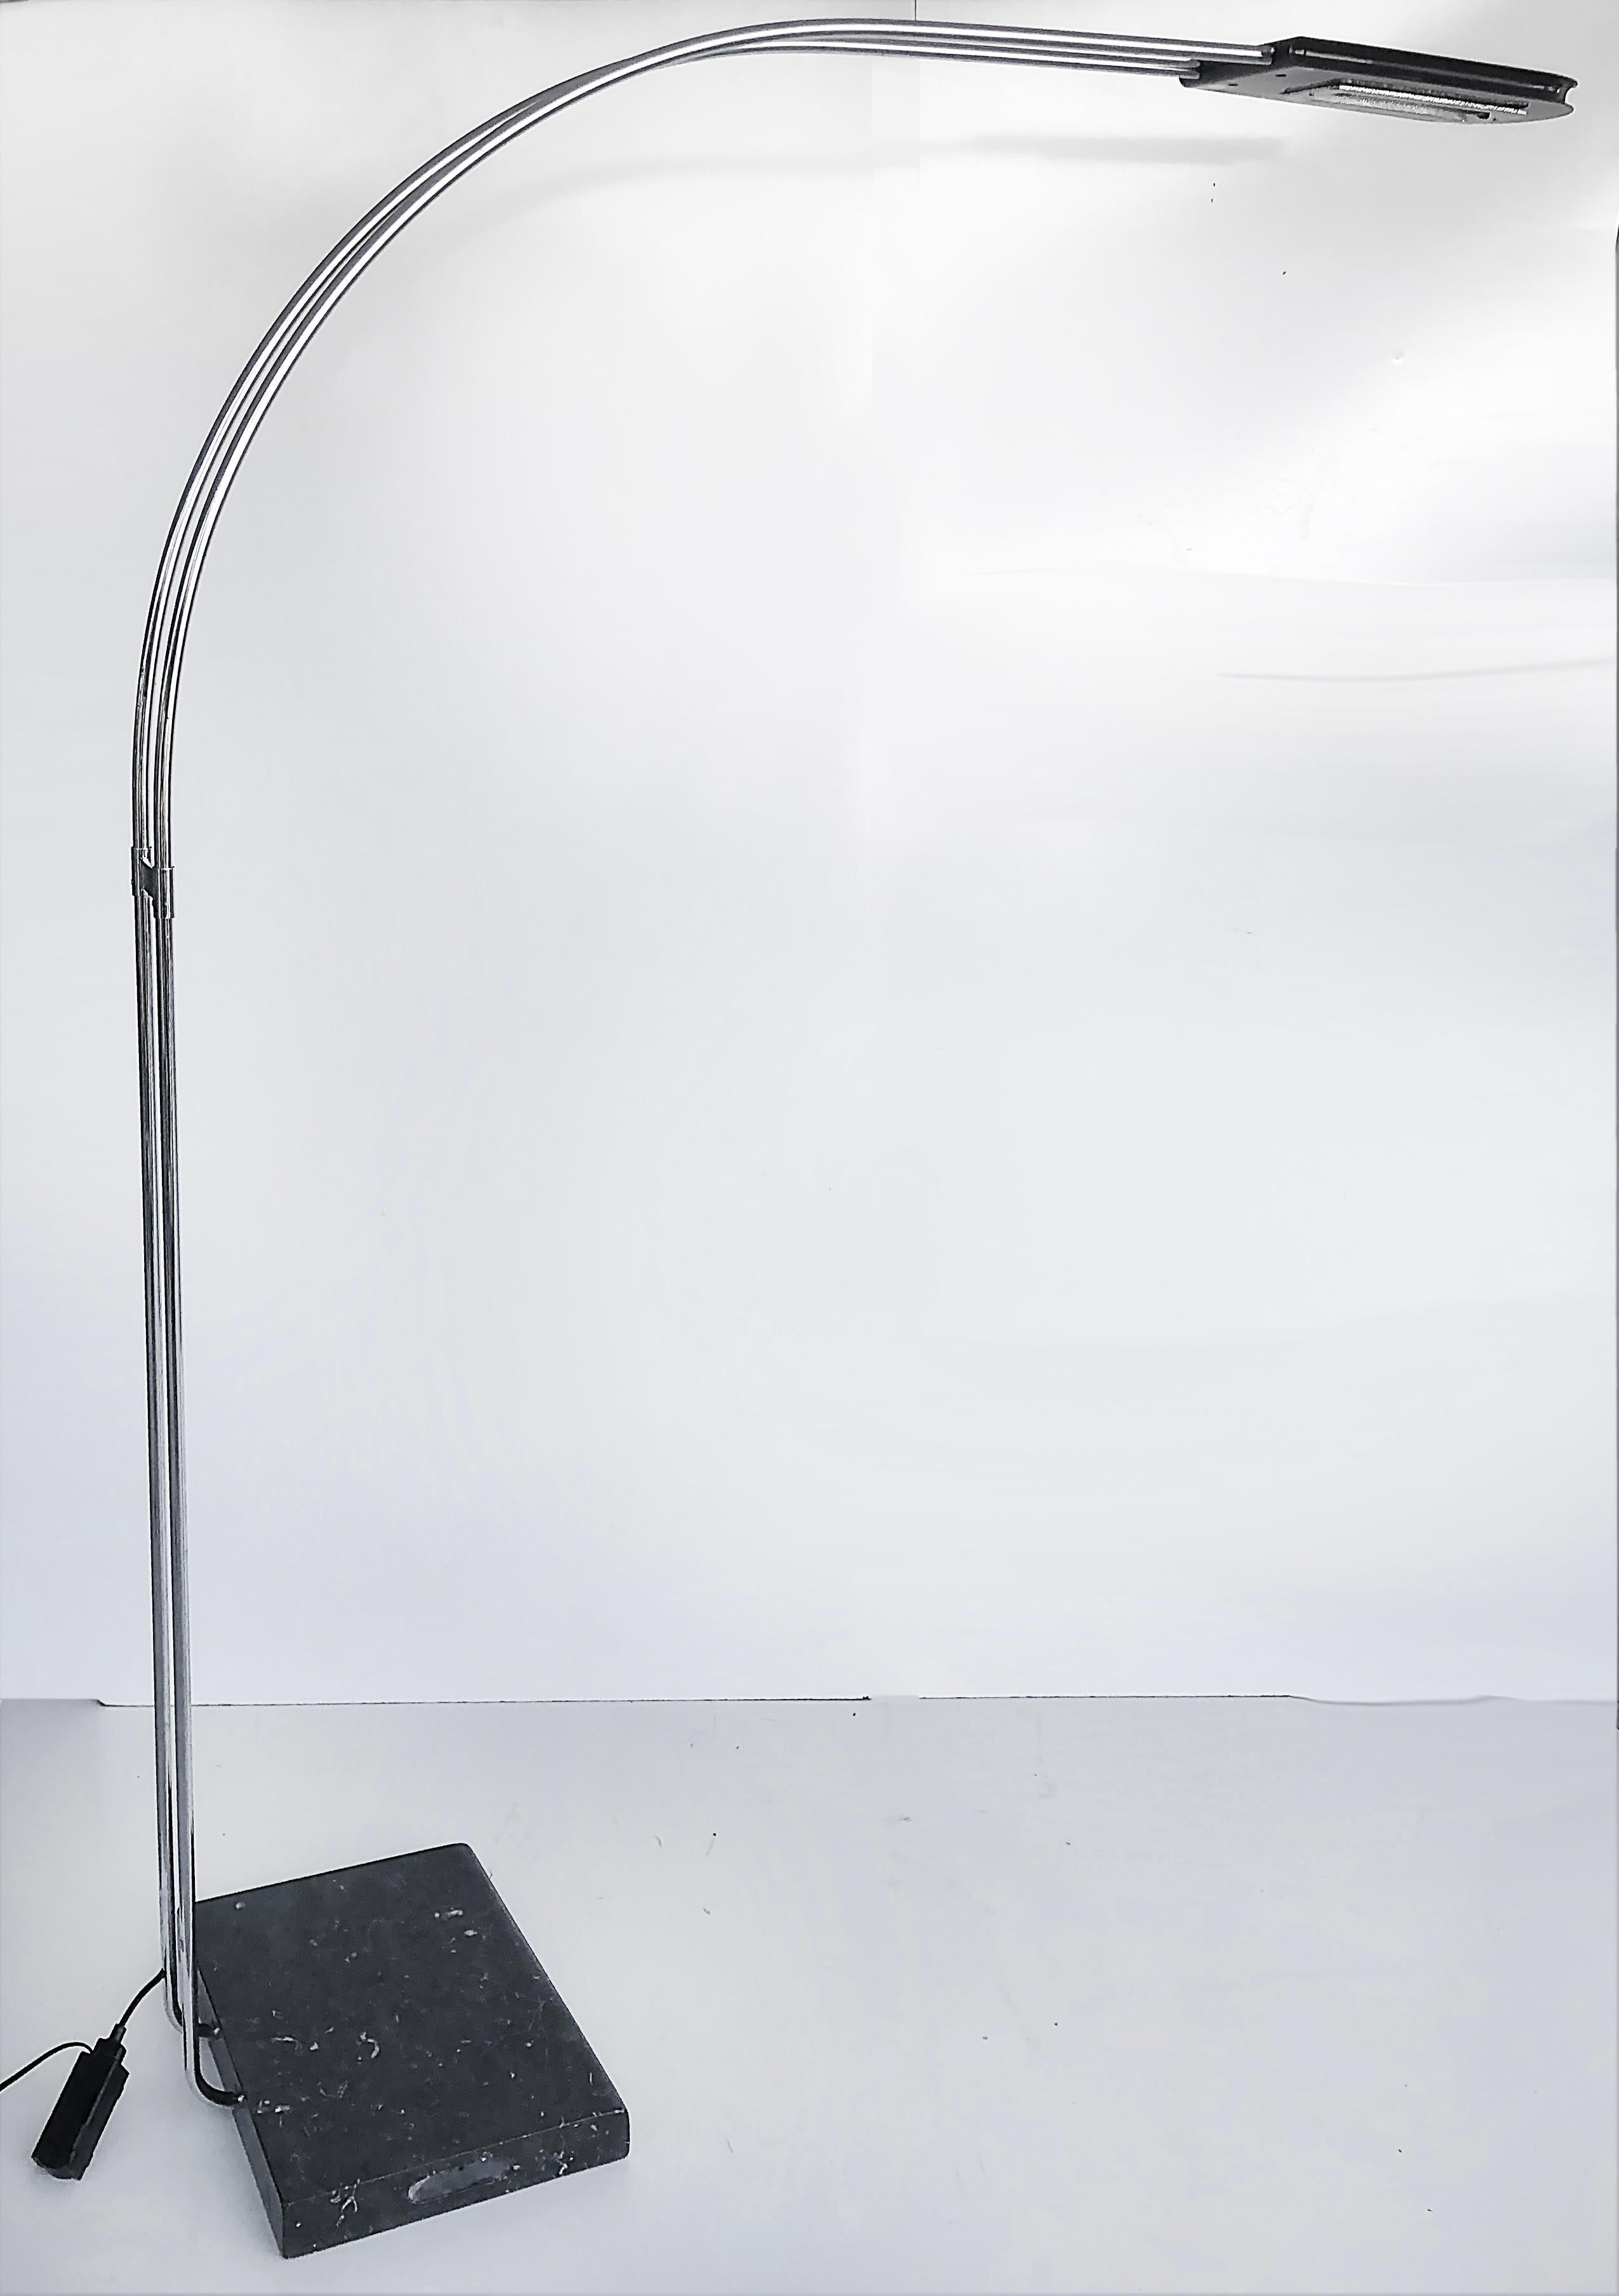 Vintage Italian Chrome Marble Halogen Arch floor lamp with Dimmer 

Offered for sale is an Italian tubular chrome and marble halogen arch floor lamp. The arch lamp uses a halogen bulb and includes a built-in dimmer. The lamp is supported by a